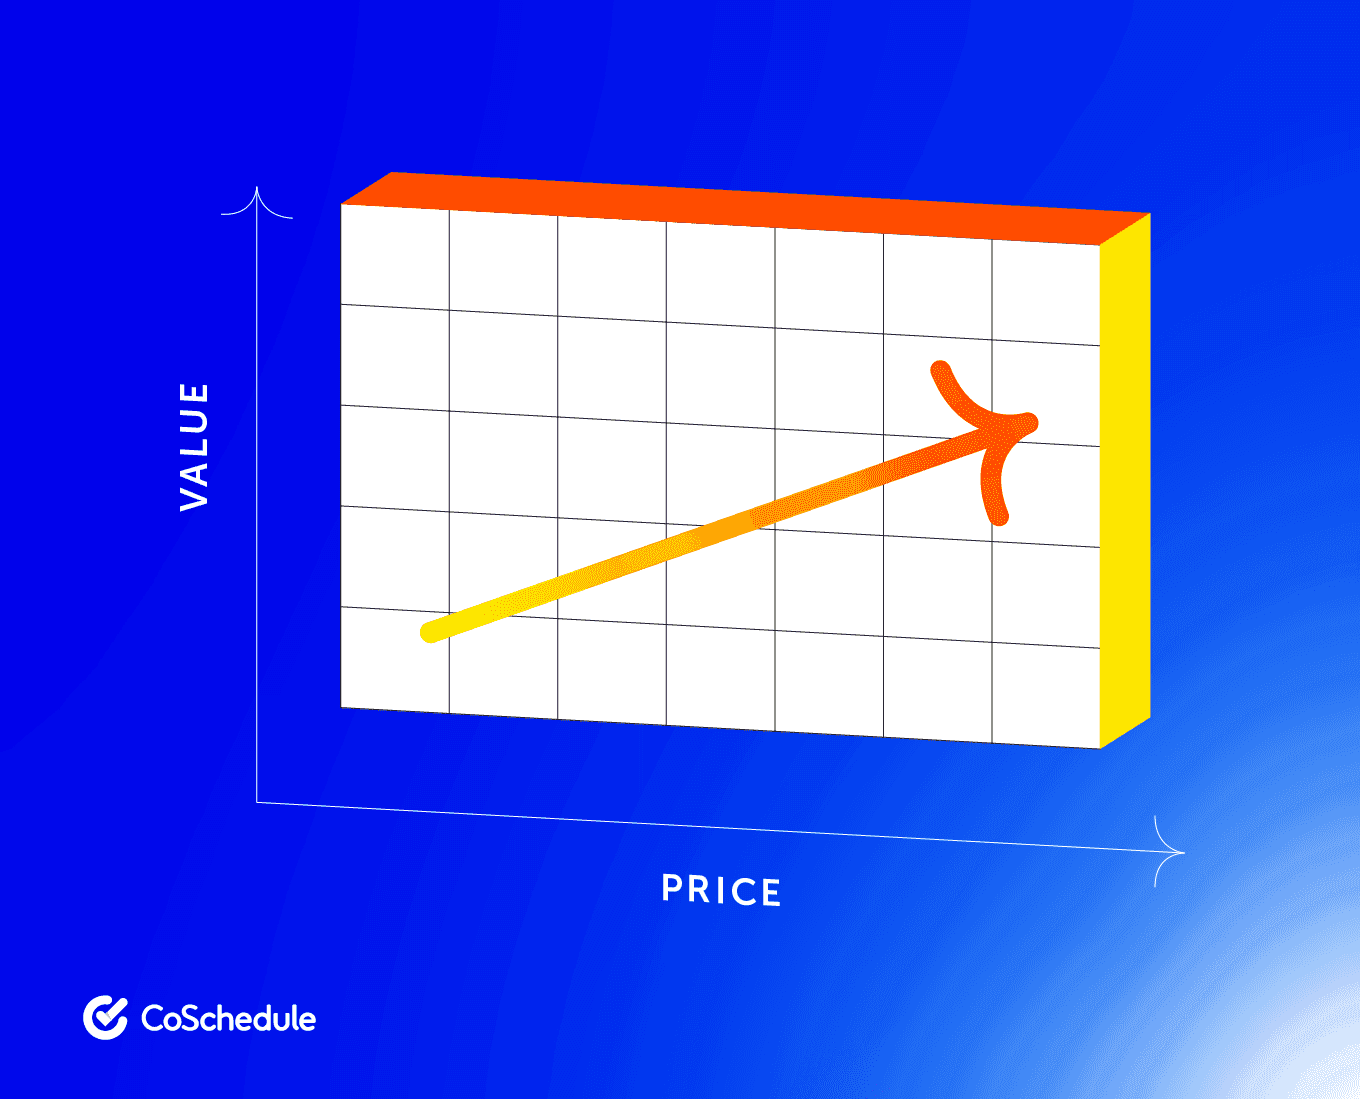 Graph with Value on the left side and Price on the bottom with the arrow going up diagonally.